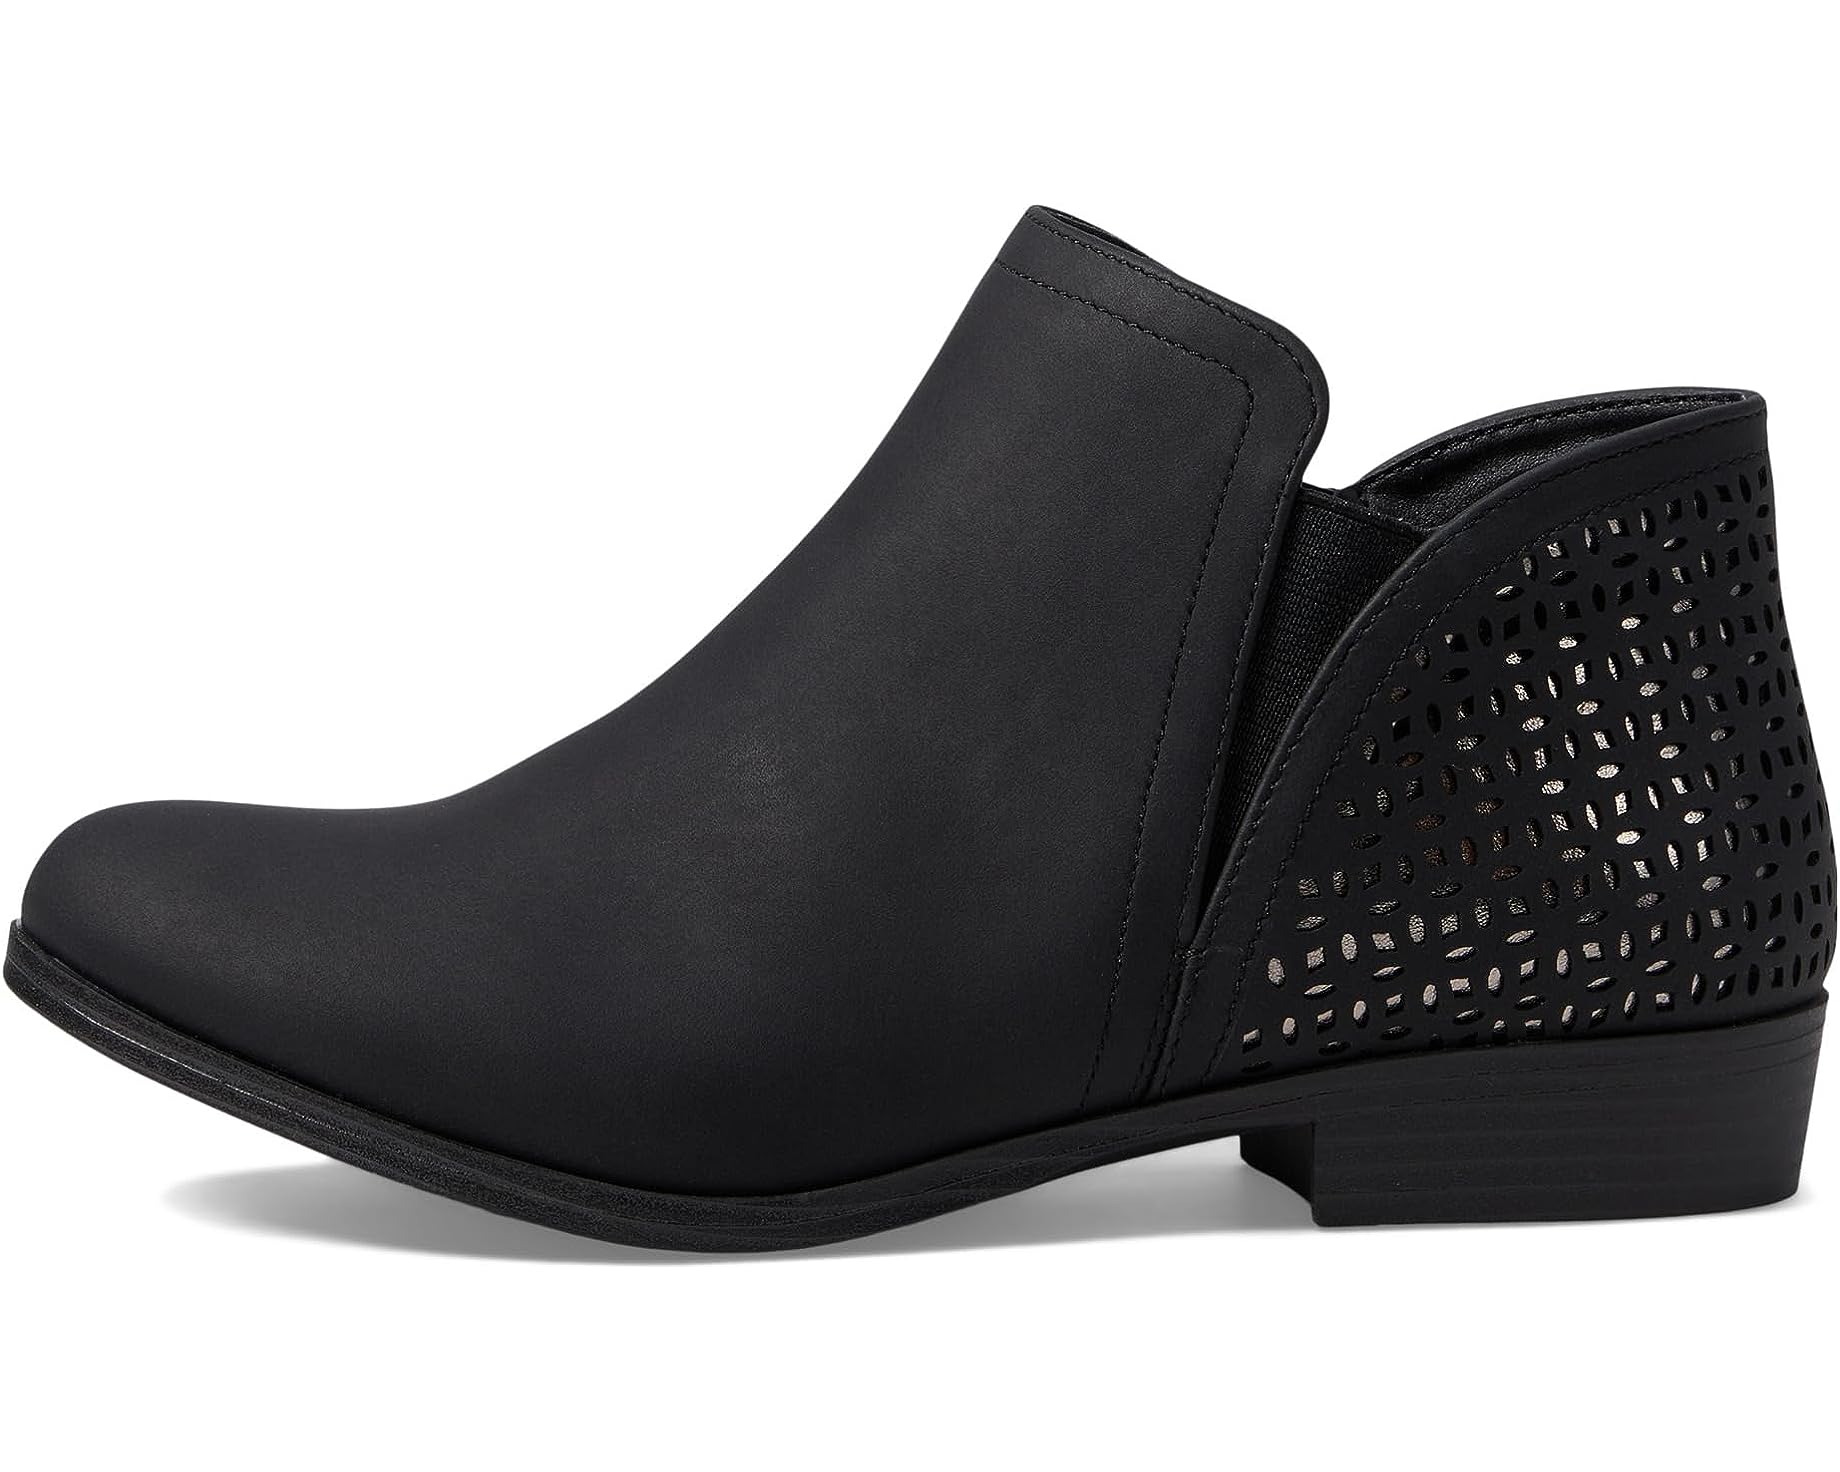 Gilli Black Suede Ankle Boot